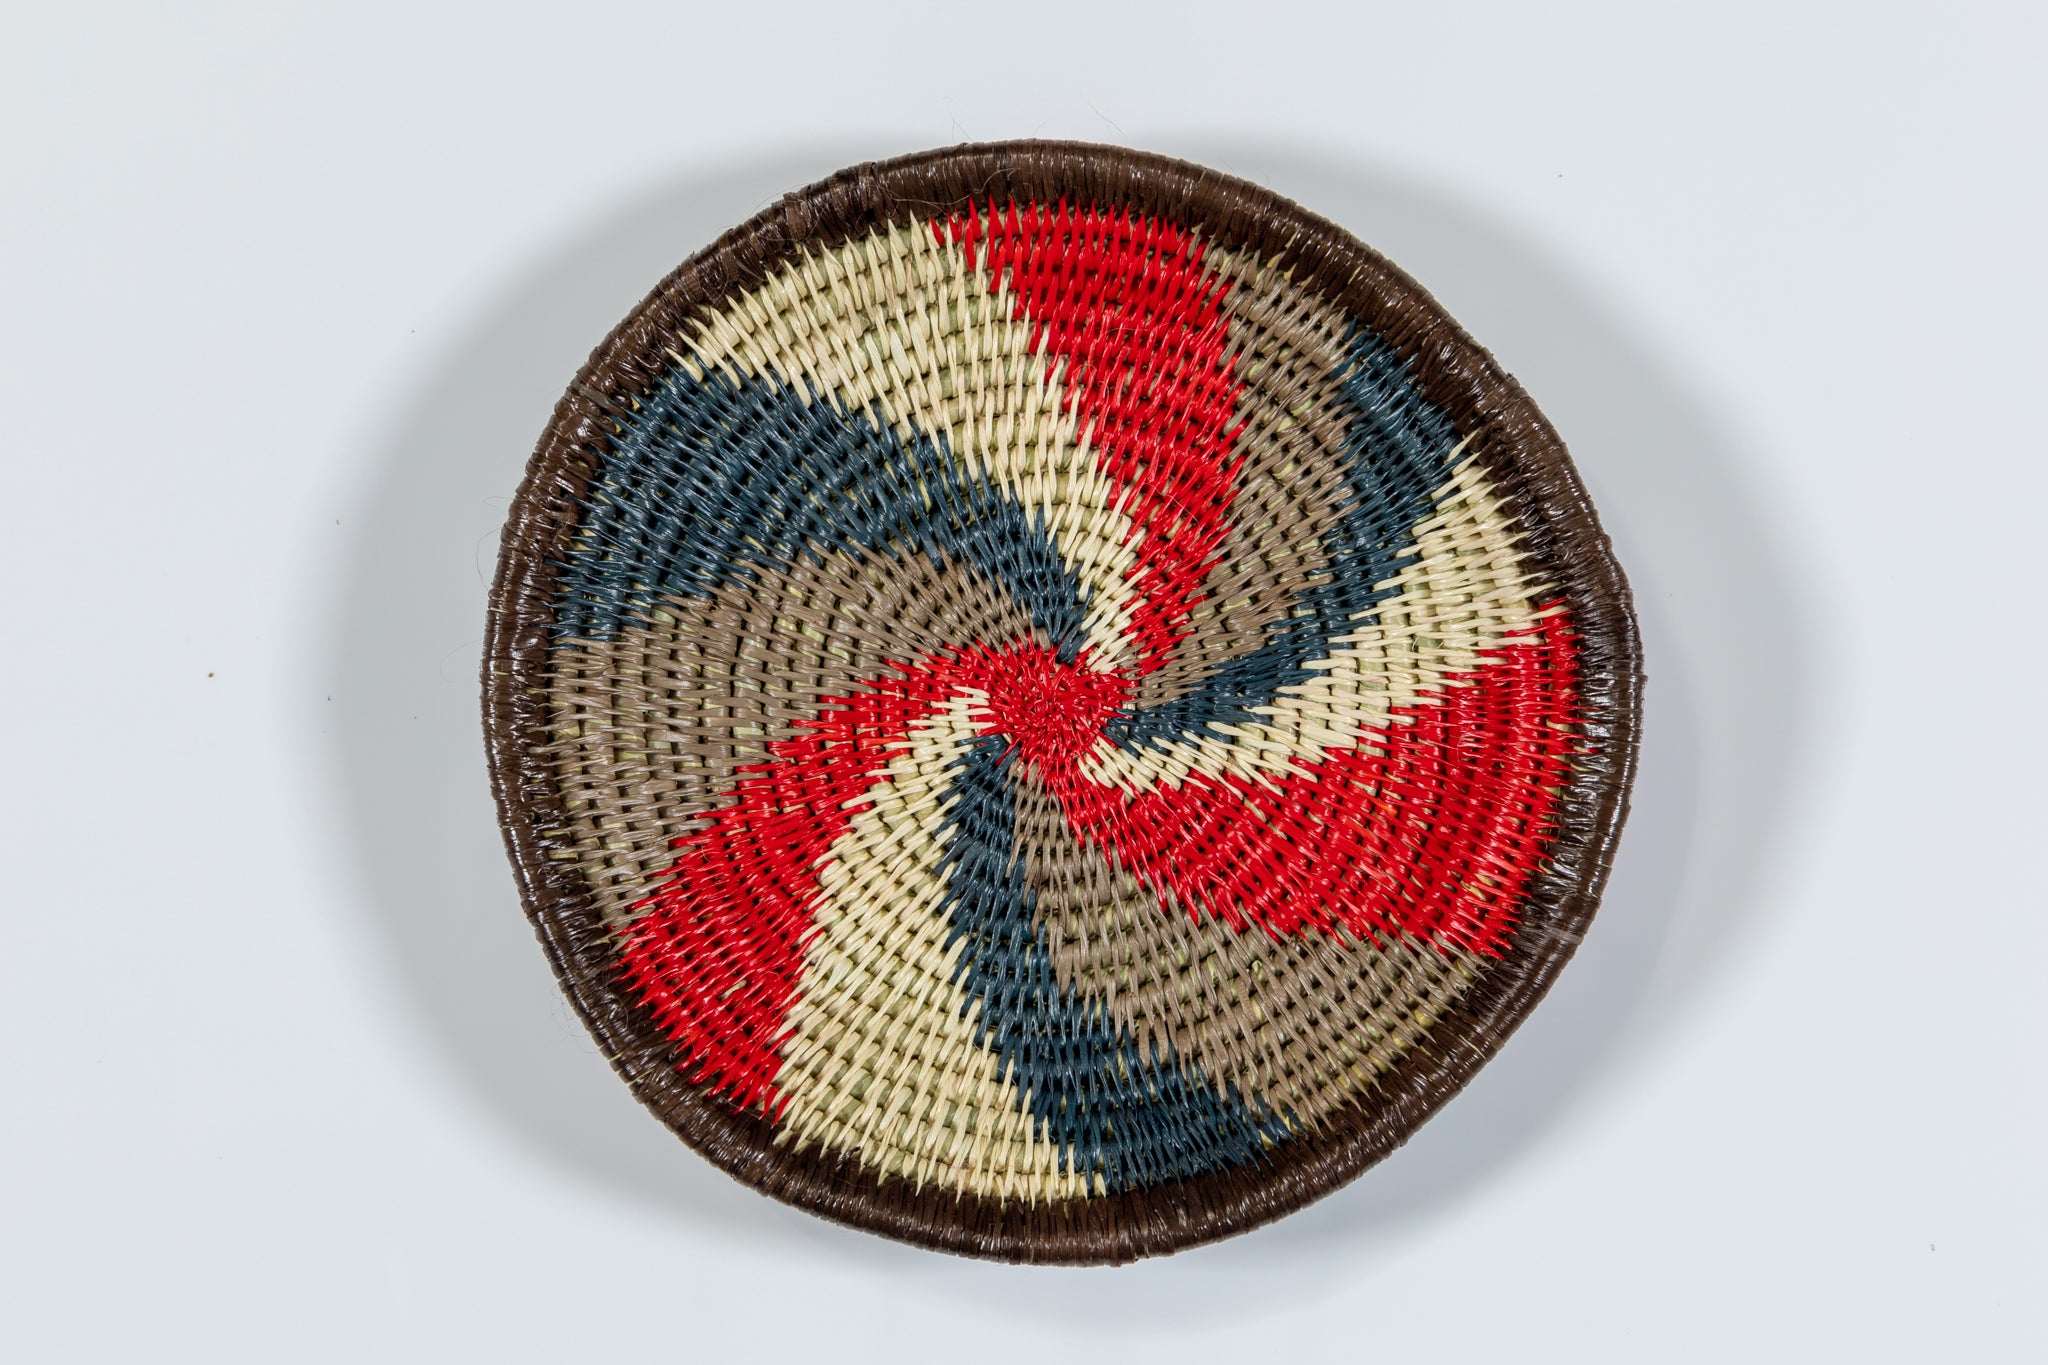 Whirlwind Spinner Small Basket Plate